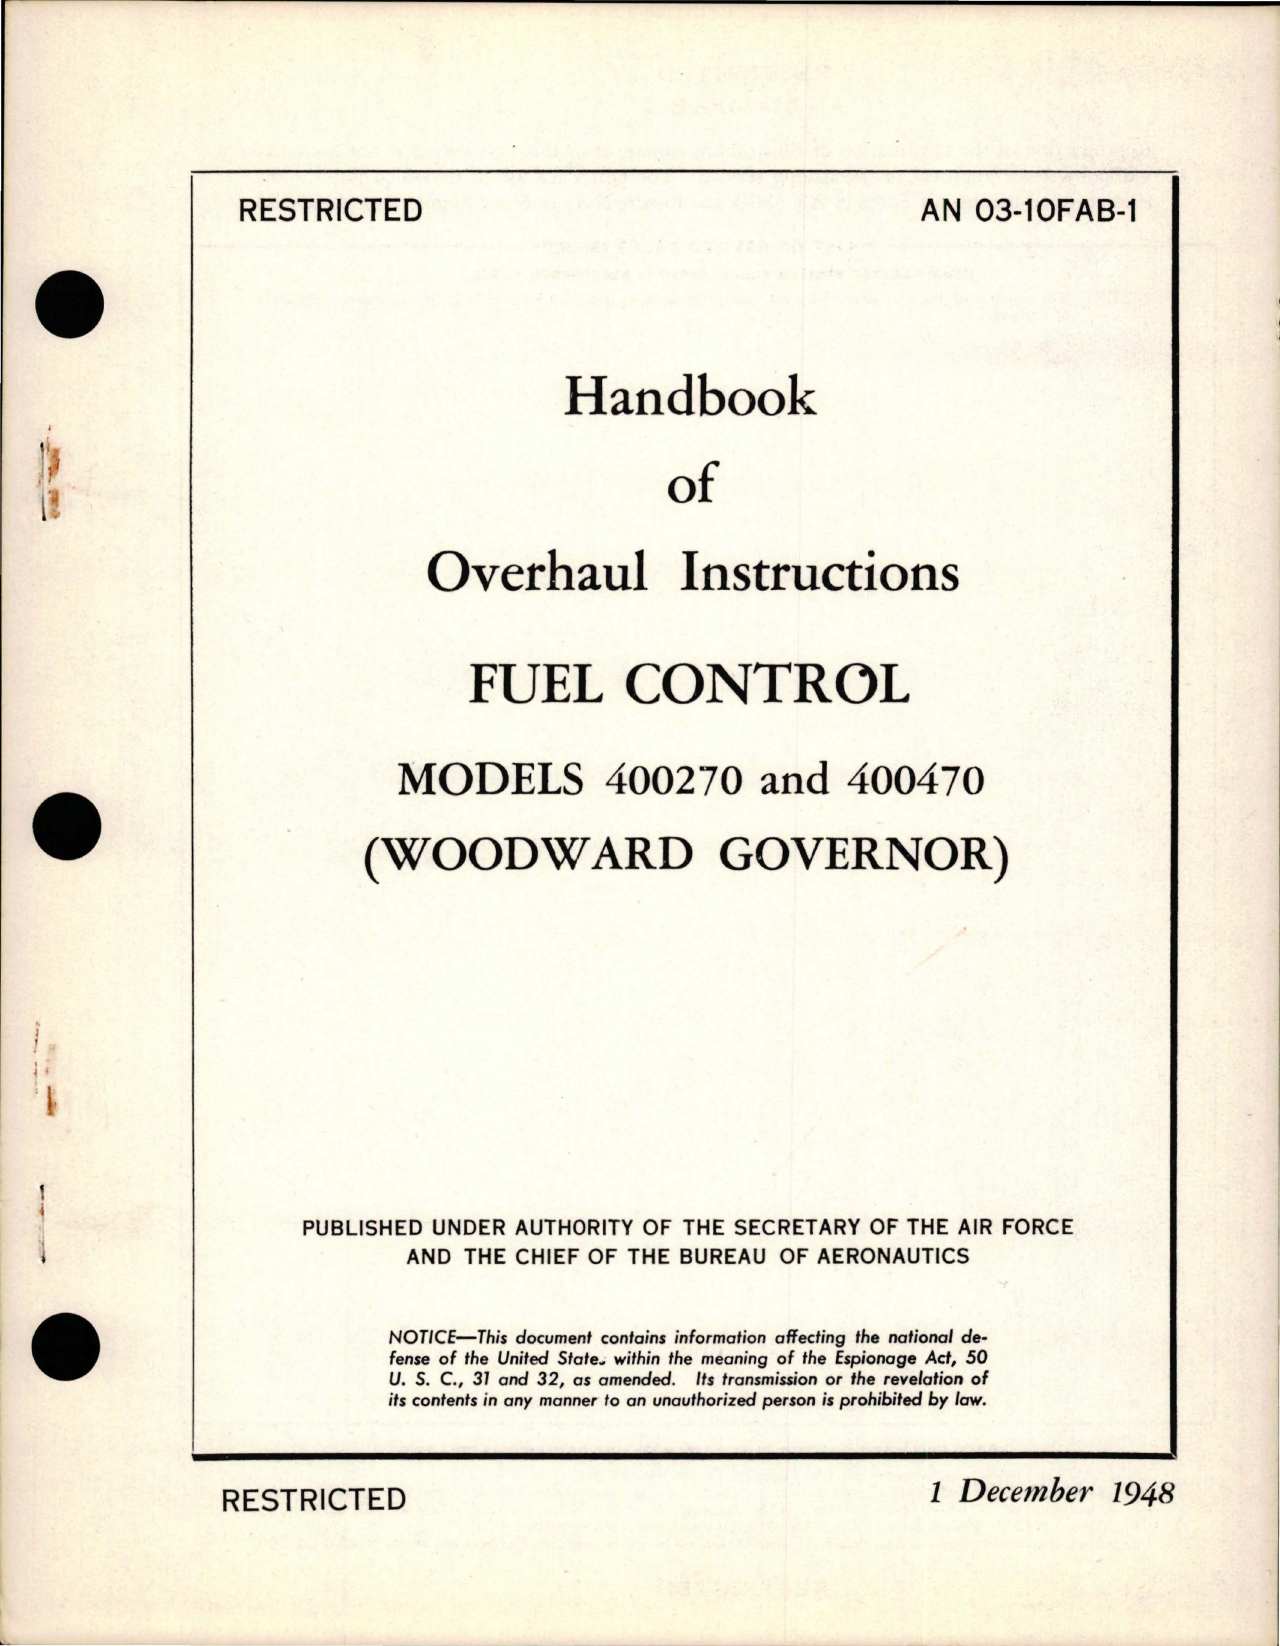 Sample page 1 from AirCorps Library document: Overhaul Instructions for Fuel Control - Models 400270 and 400470